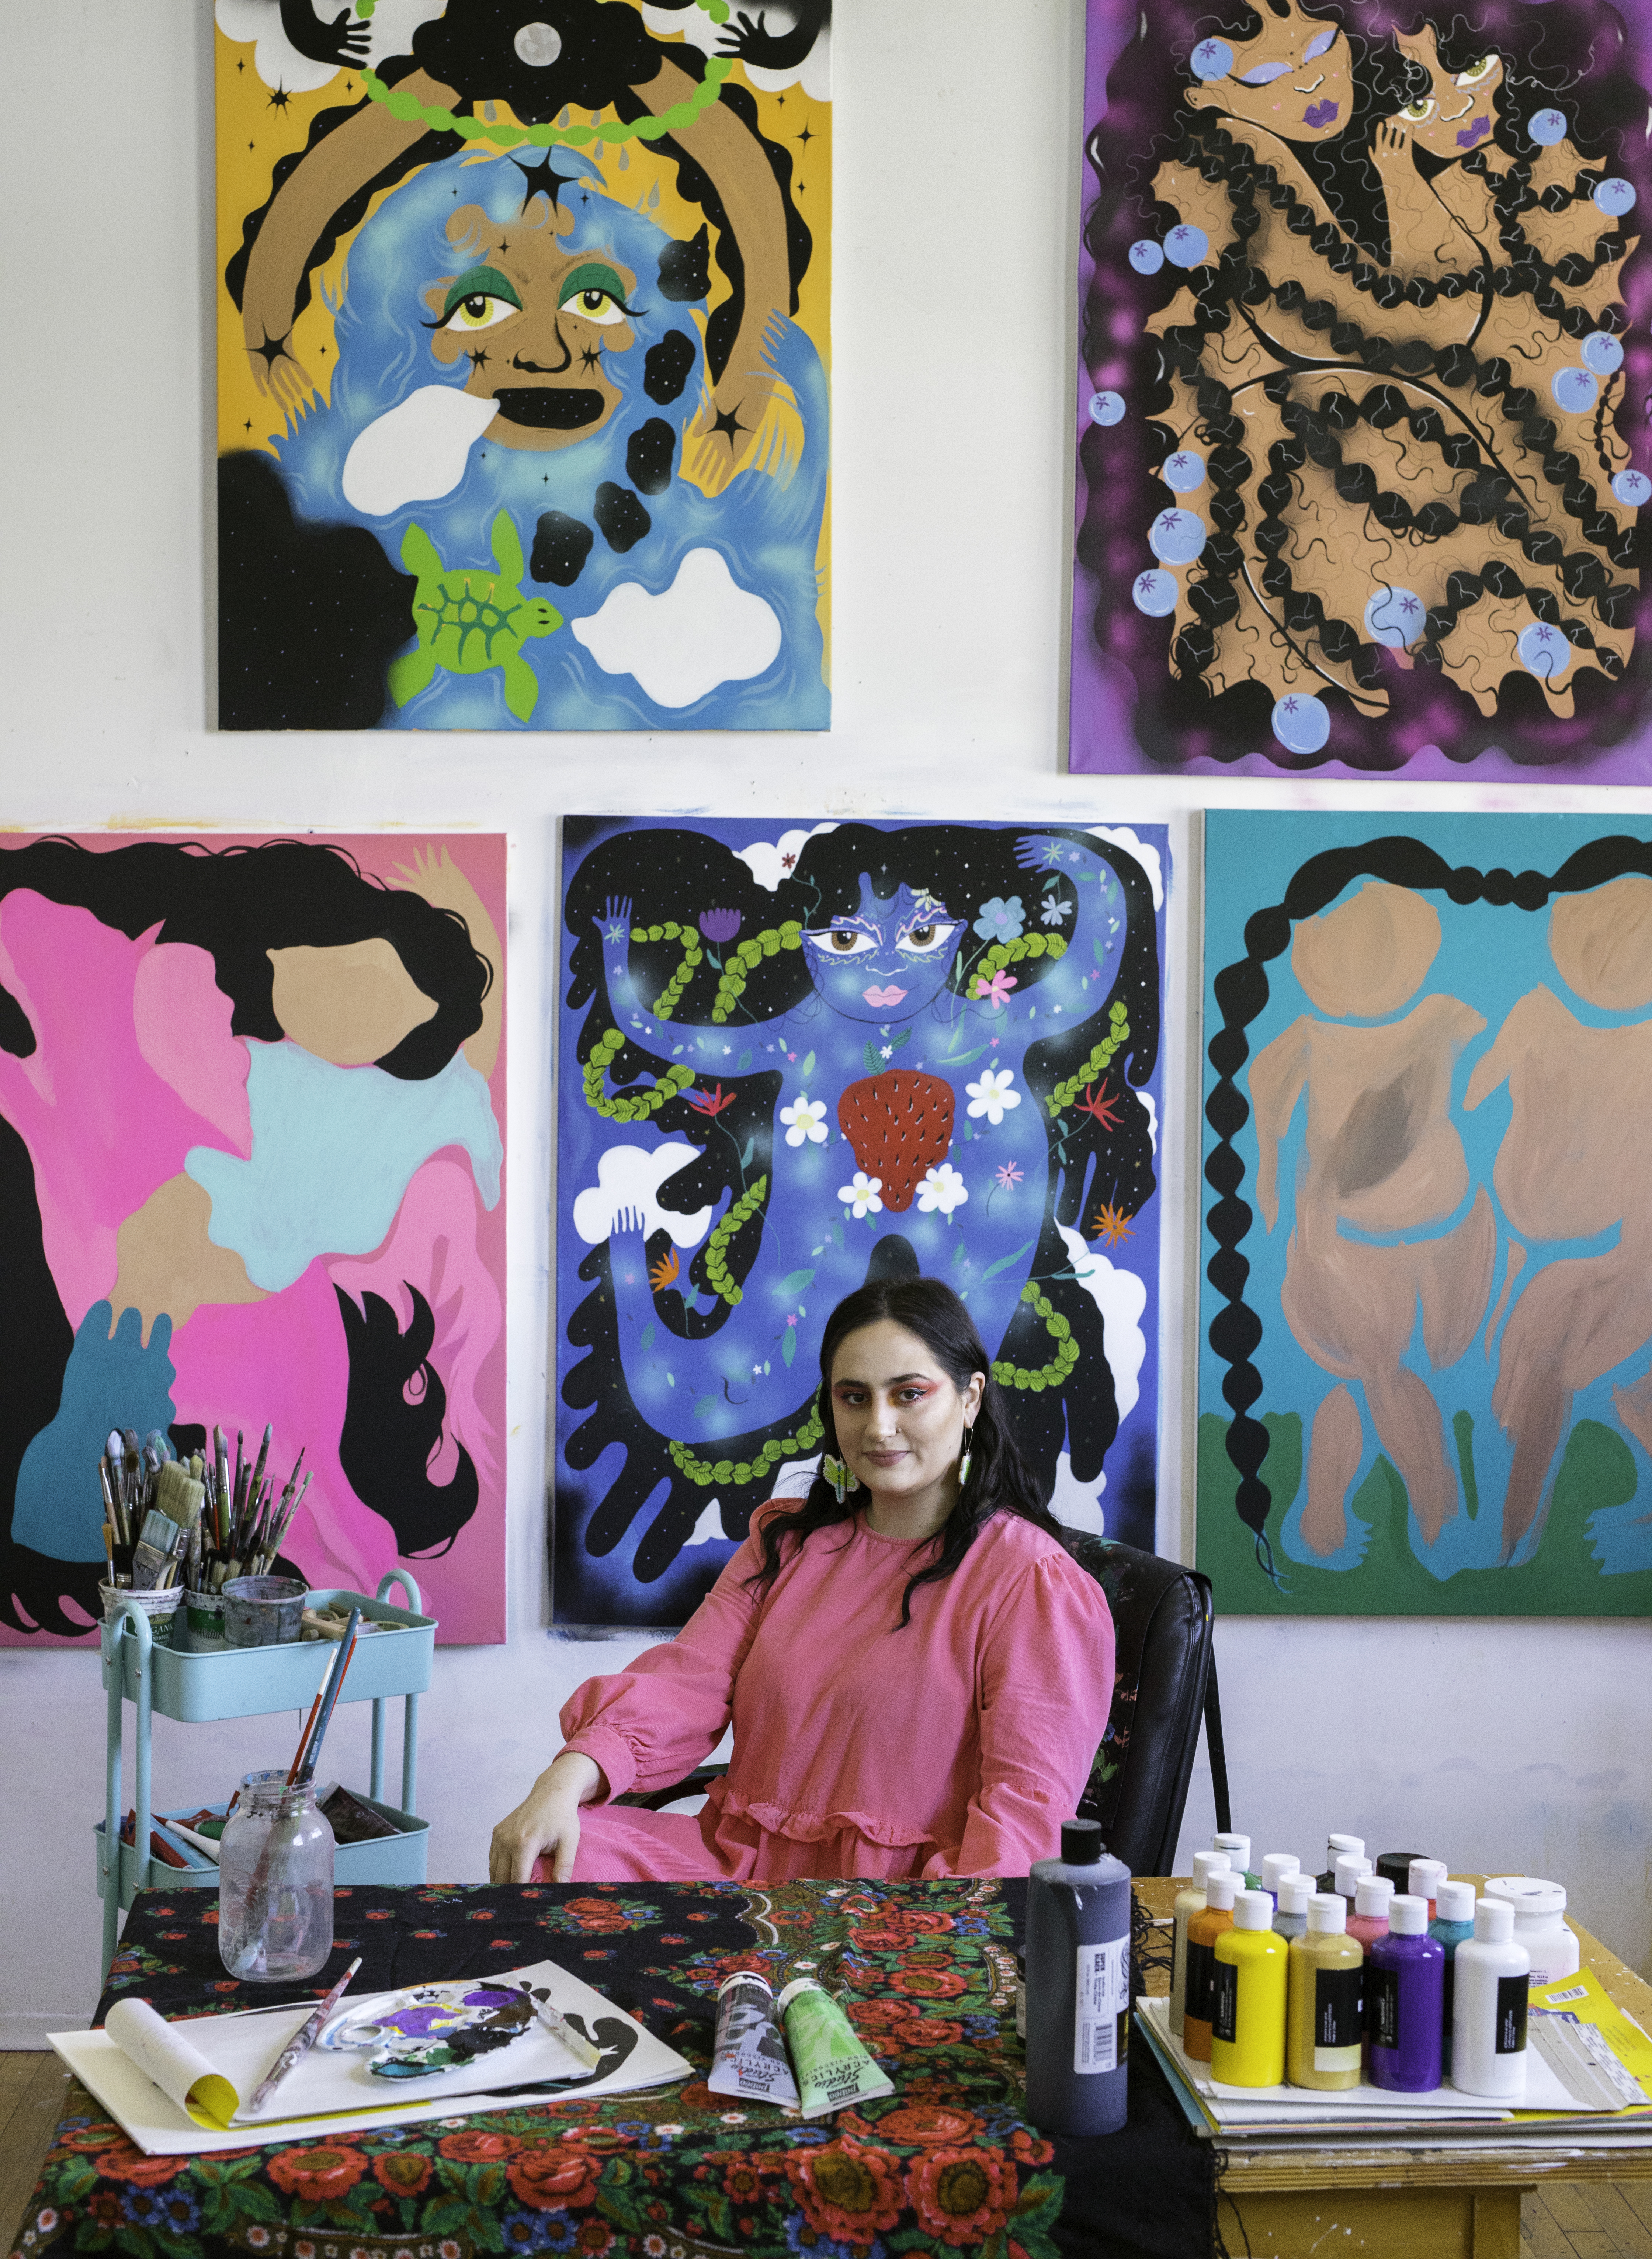 A person posing and surrounded by artwork. A woman with black hair, wearing hot pink dress.